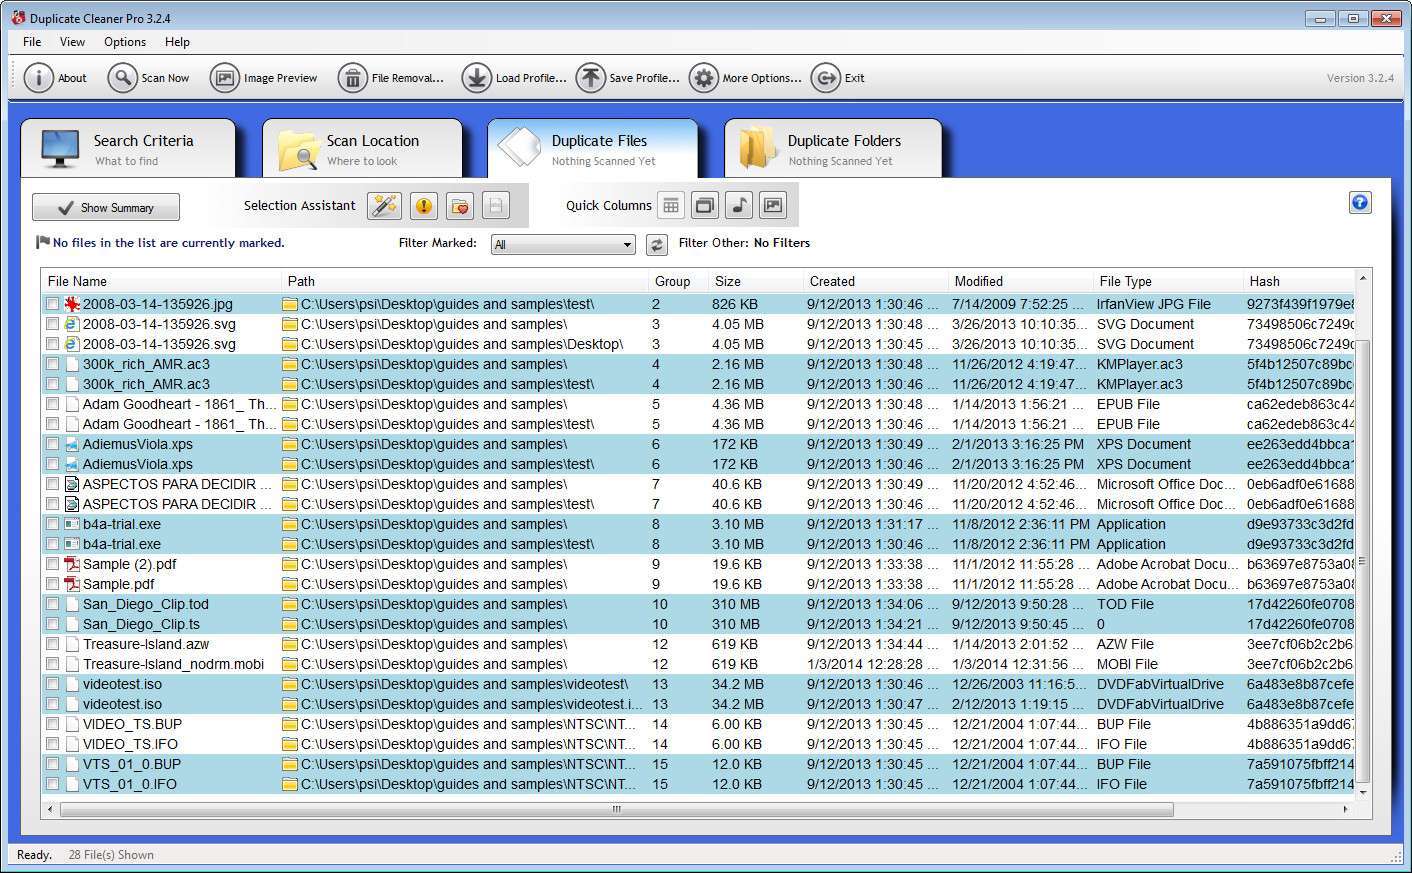 Duplicate Cleaner Pro 5.21.2 download the new